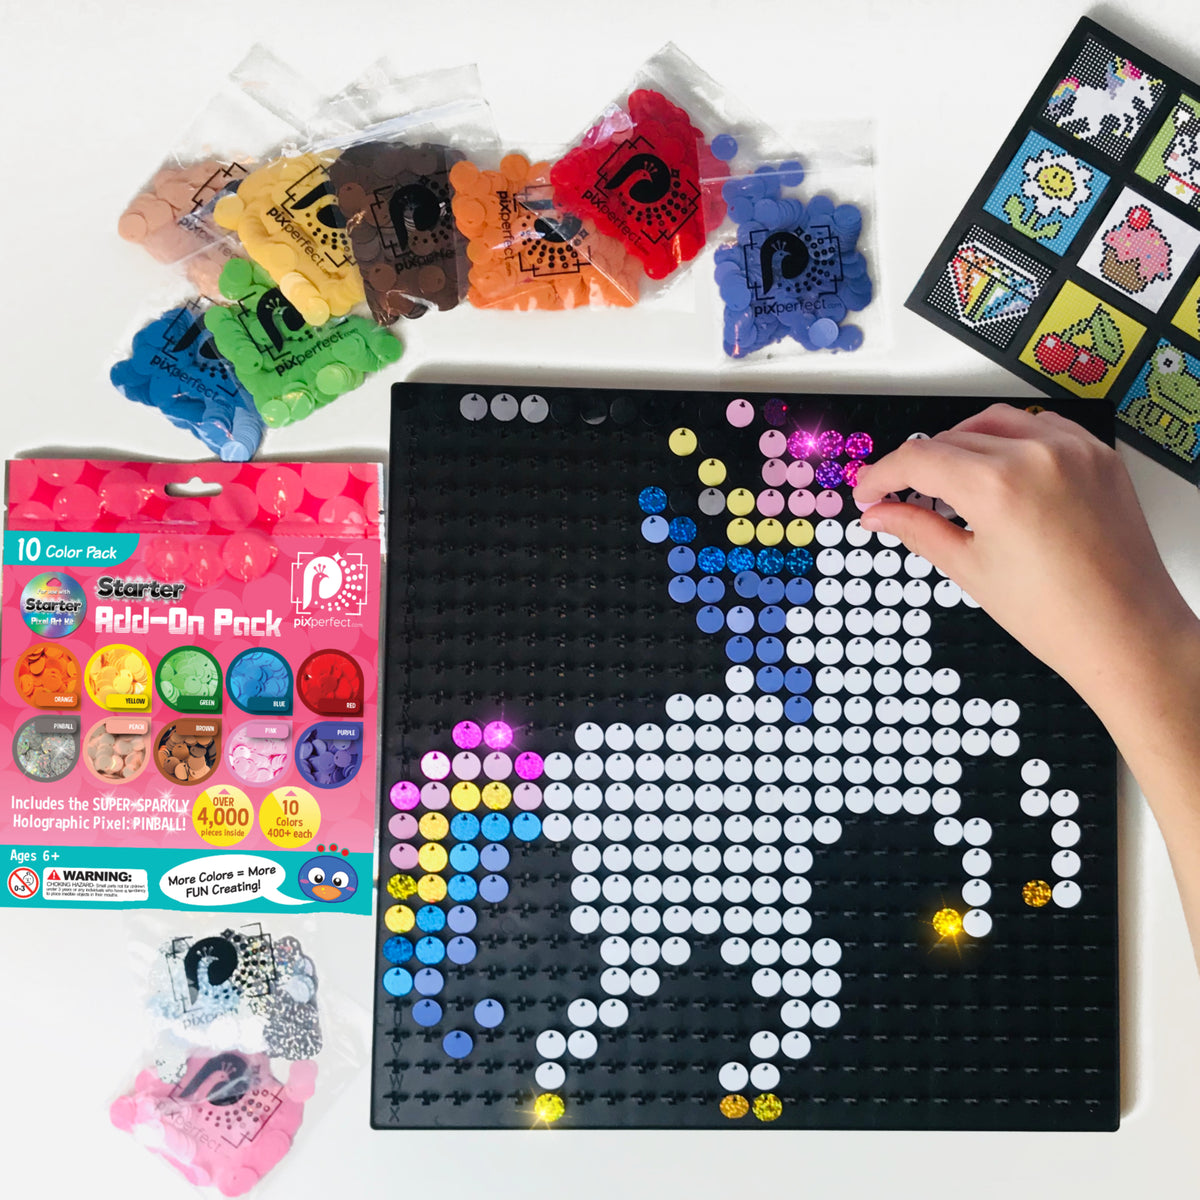 Tic Tac Toy - We found this fun Pixel Art Kit at Learning